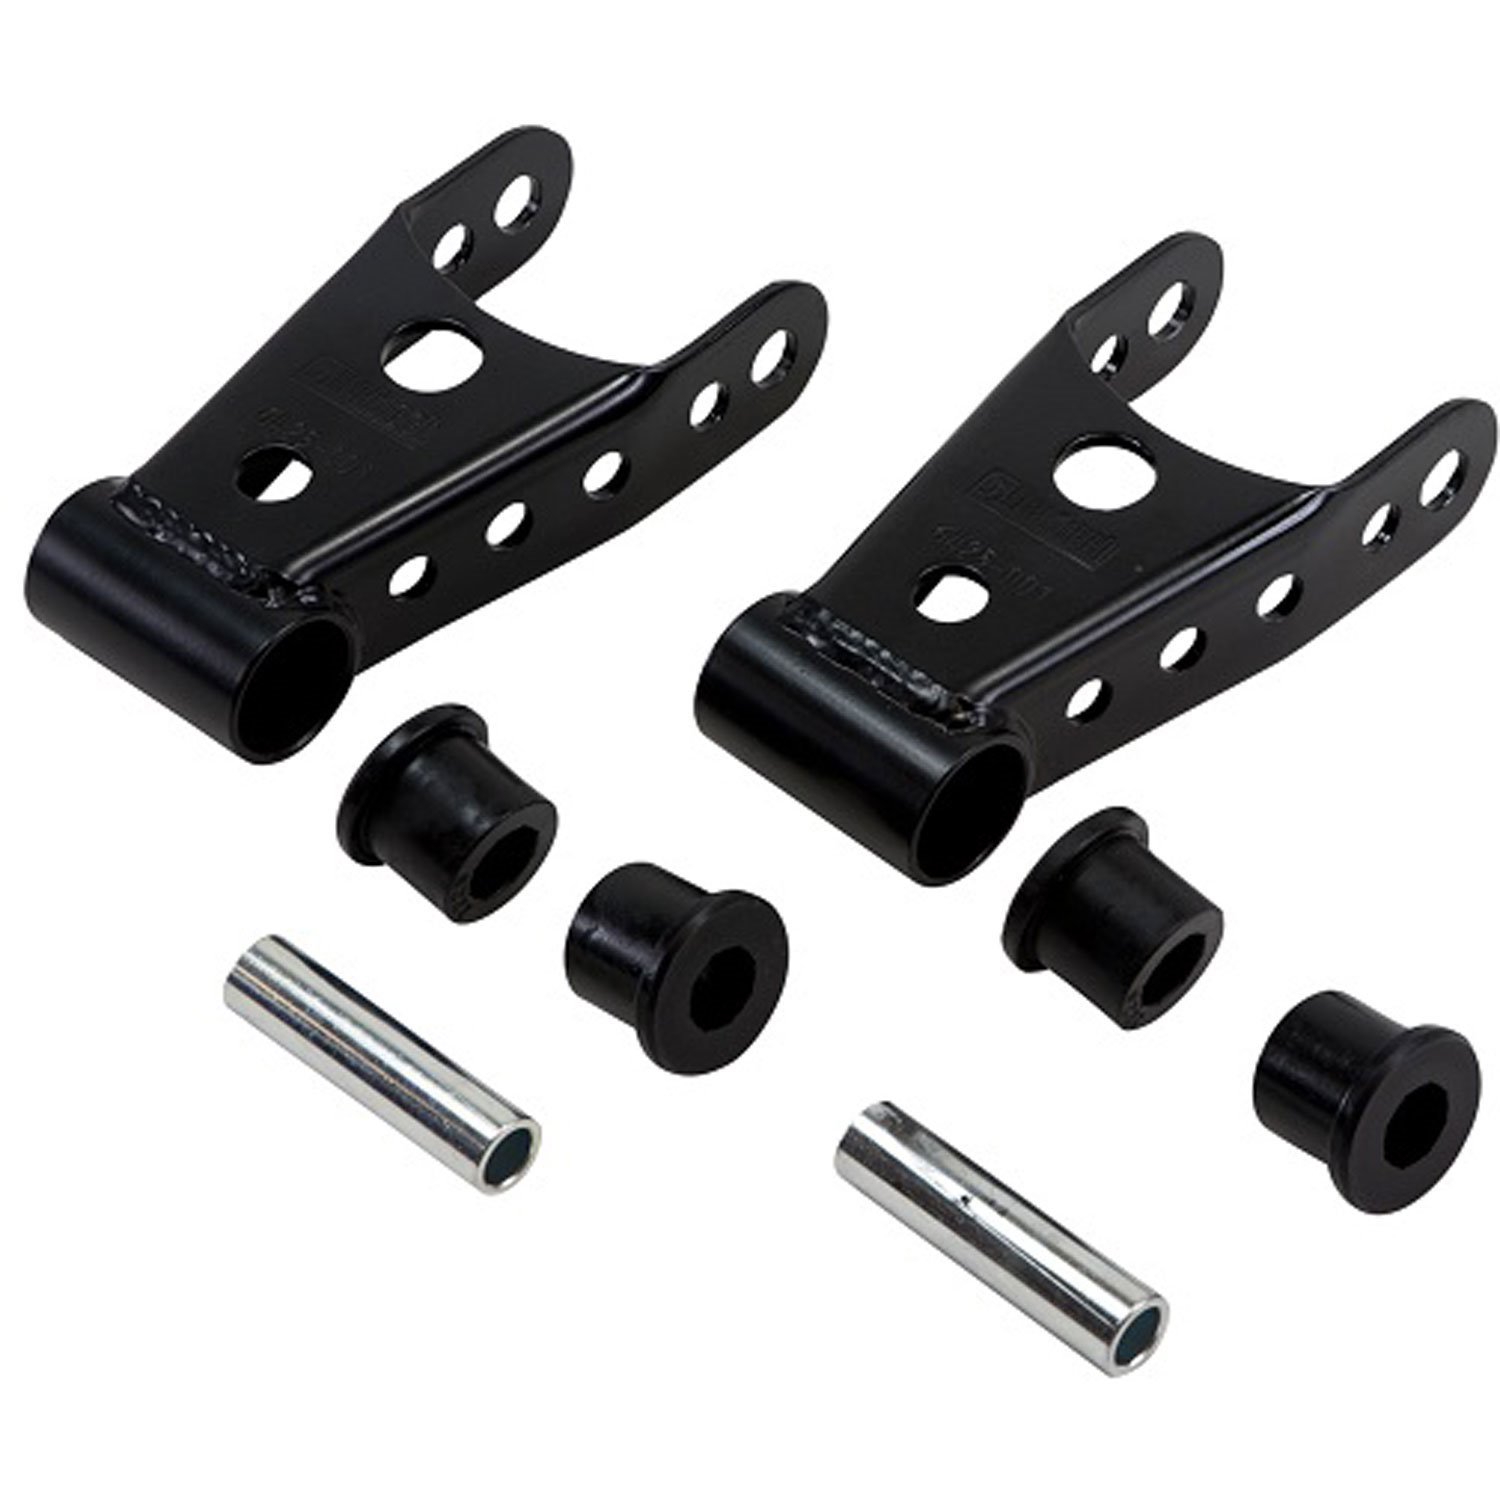 Rear Leaf Spring Shackle Kit for 2011-2013 Chevy Silverado/GMC Sierra 2500 and 2015-2016 Ford F-150 Extended/Crew Cab